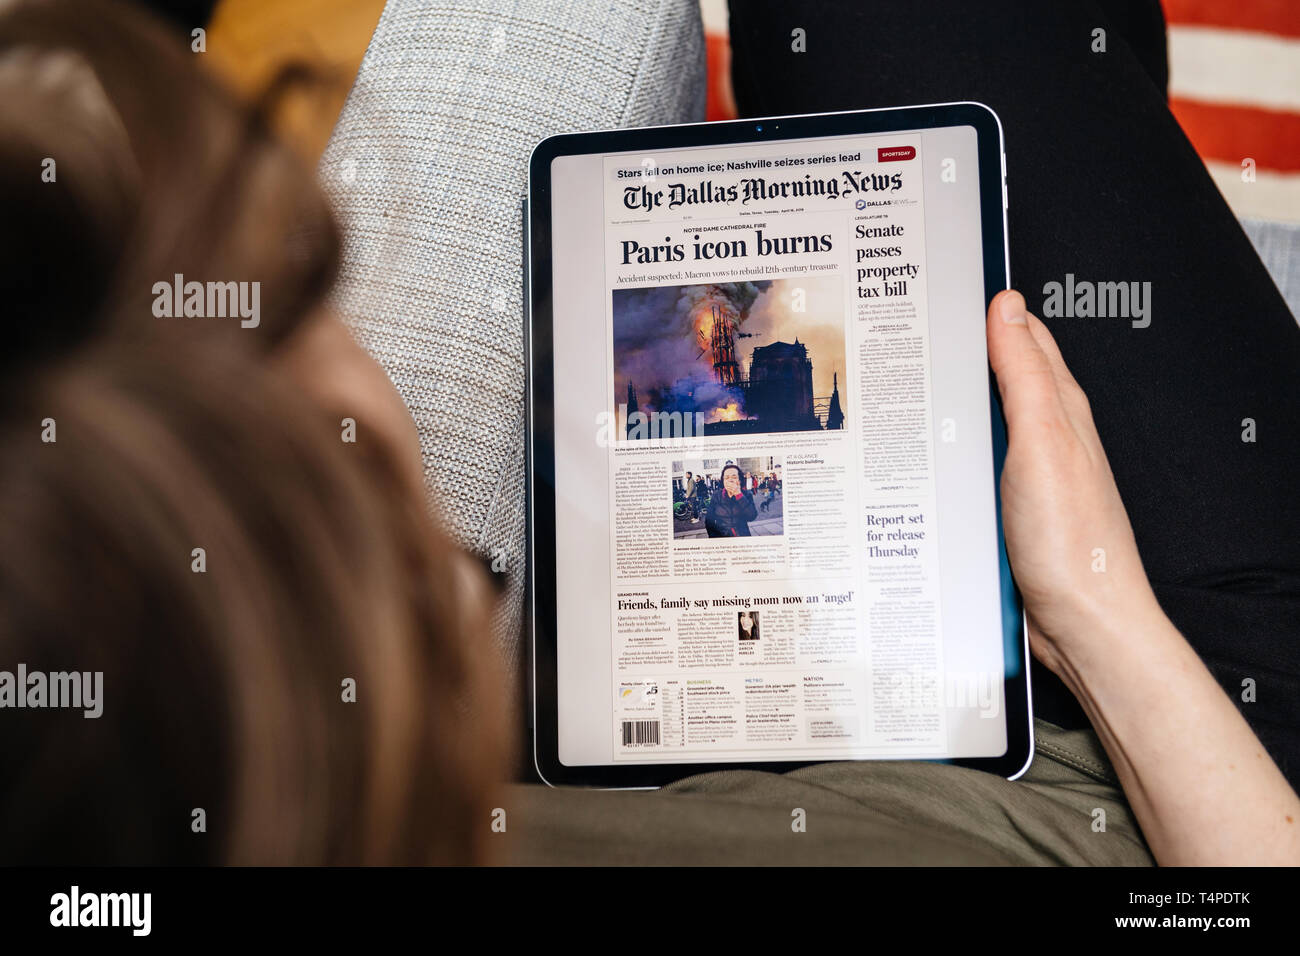 Paris, France - Apr 15, 2019: Woman reading The Dallas Morning News on iPad Pro Apple News Plus digital newspaper featuring breaking news on cover French Notre-Dame Cathedral on fire causing damages  Stock Photo